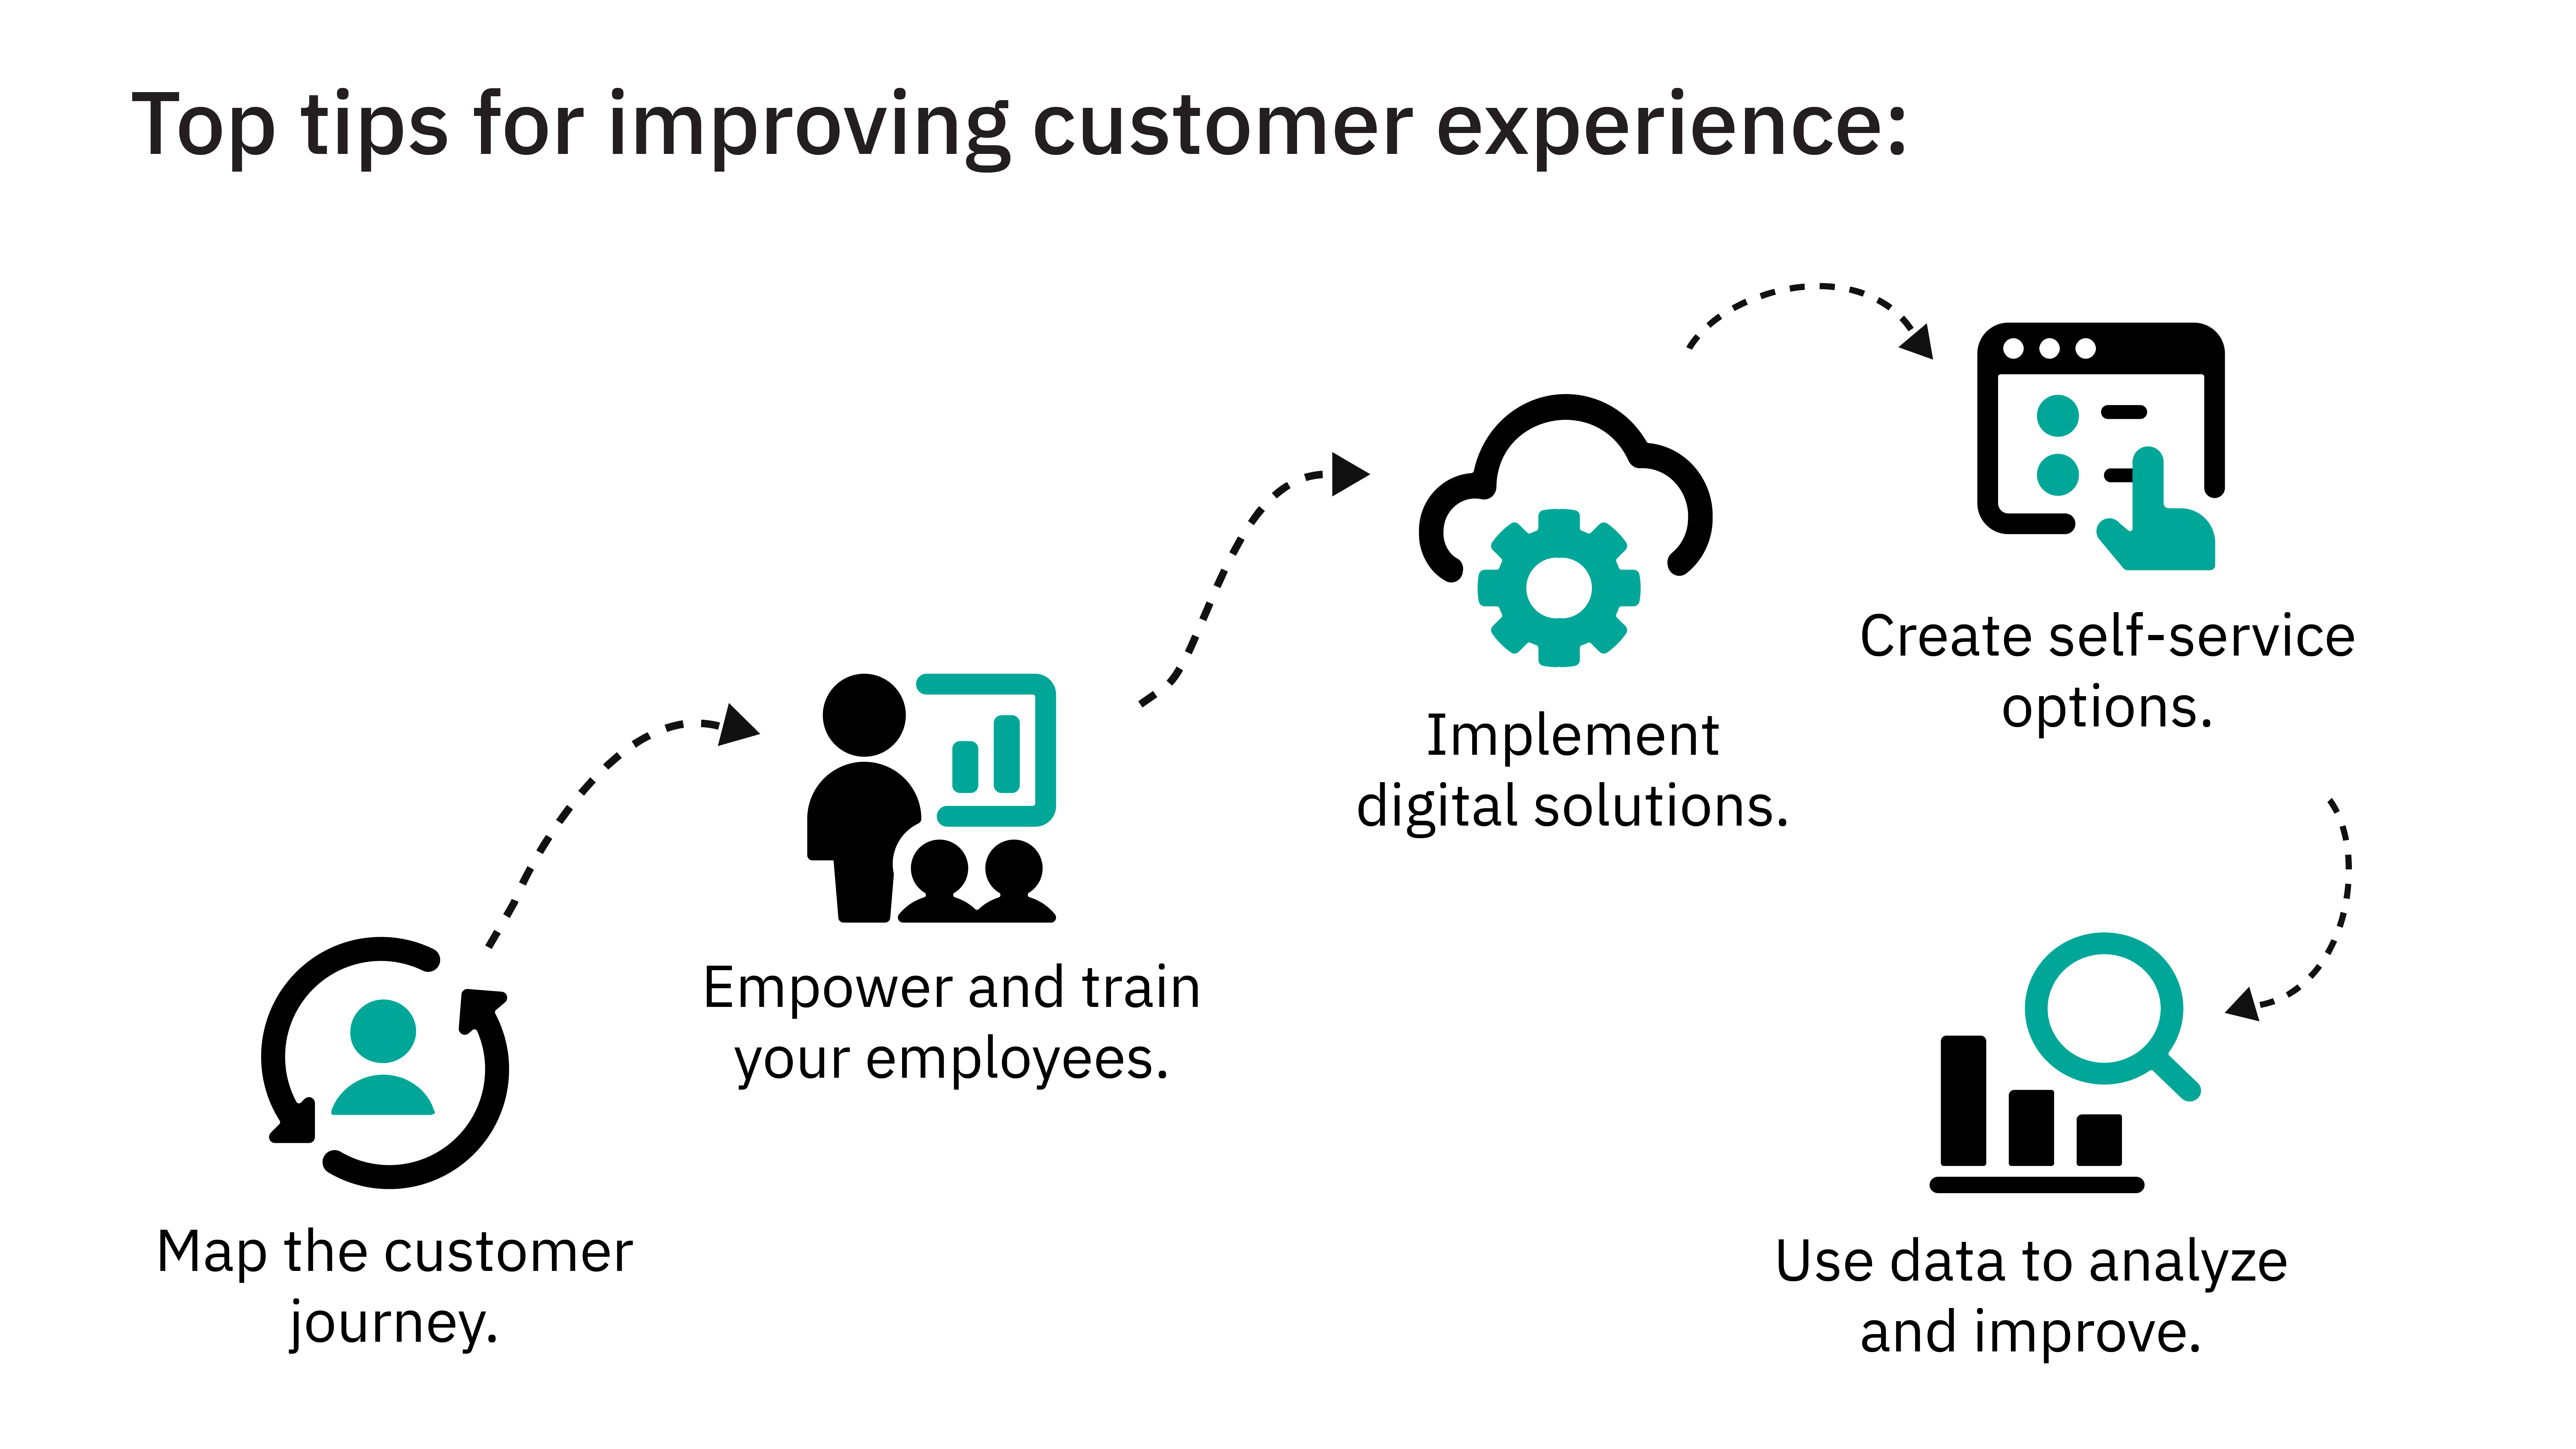 Top tips for improving customer experience